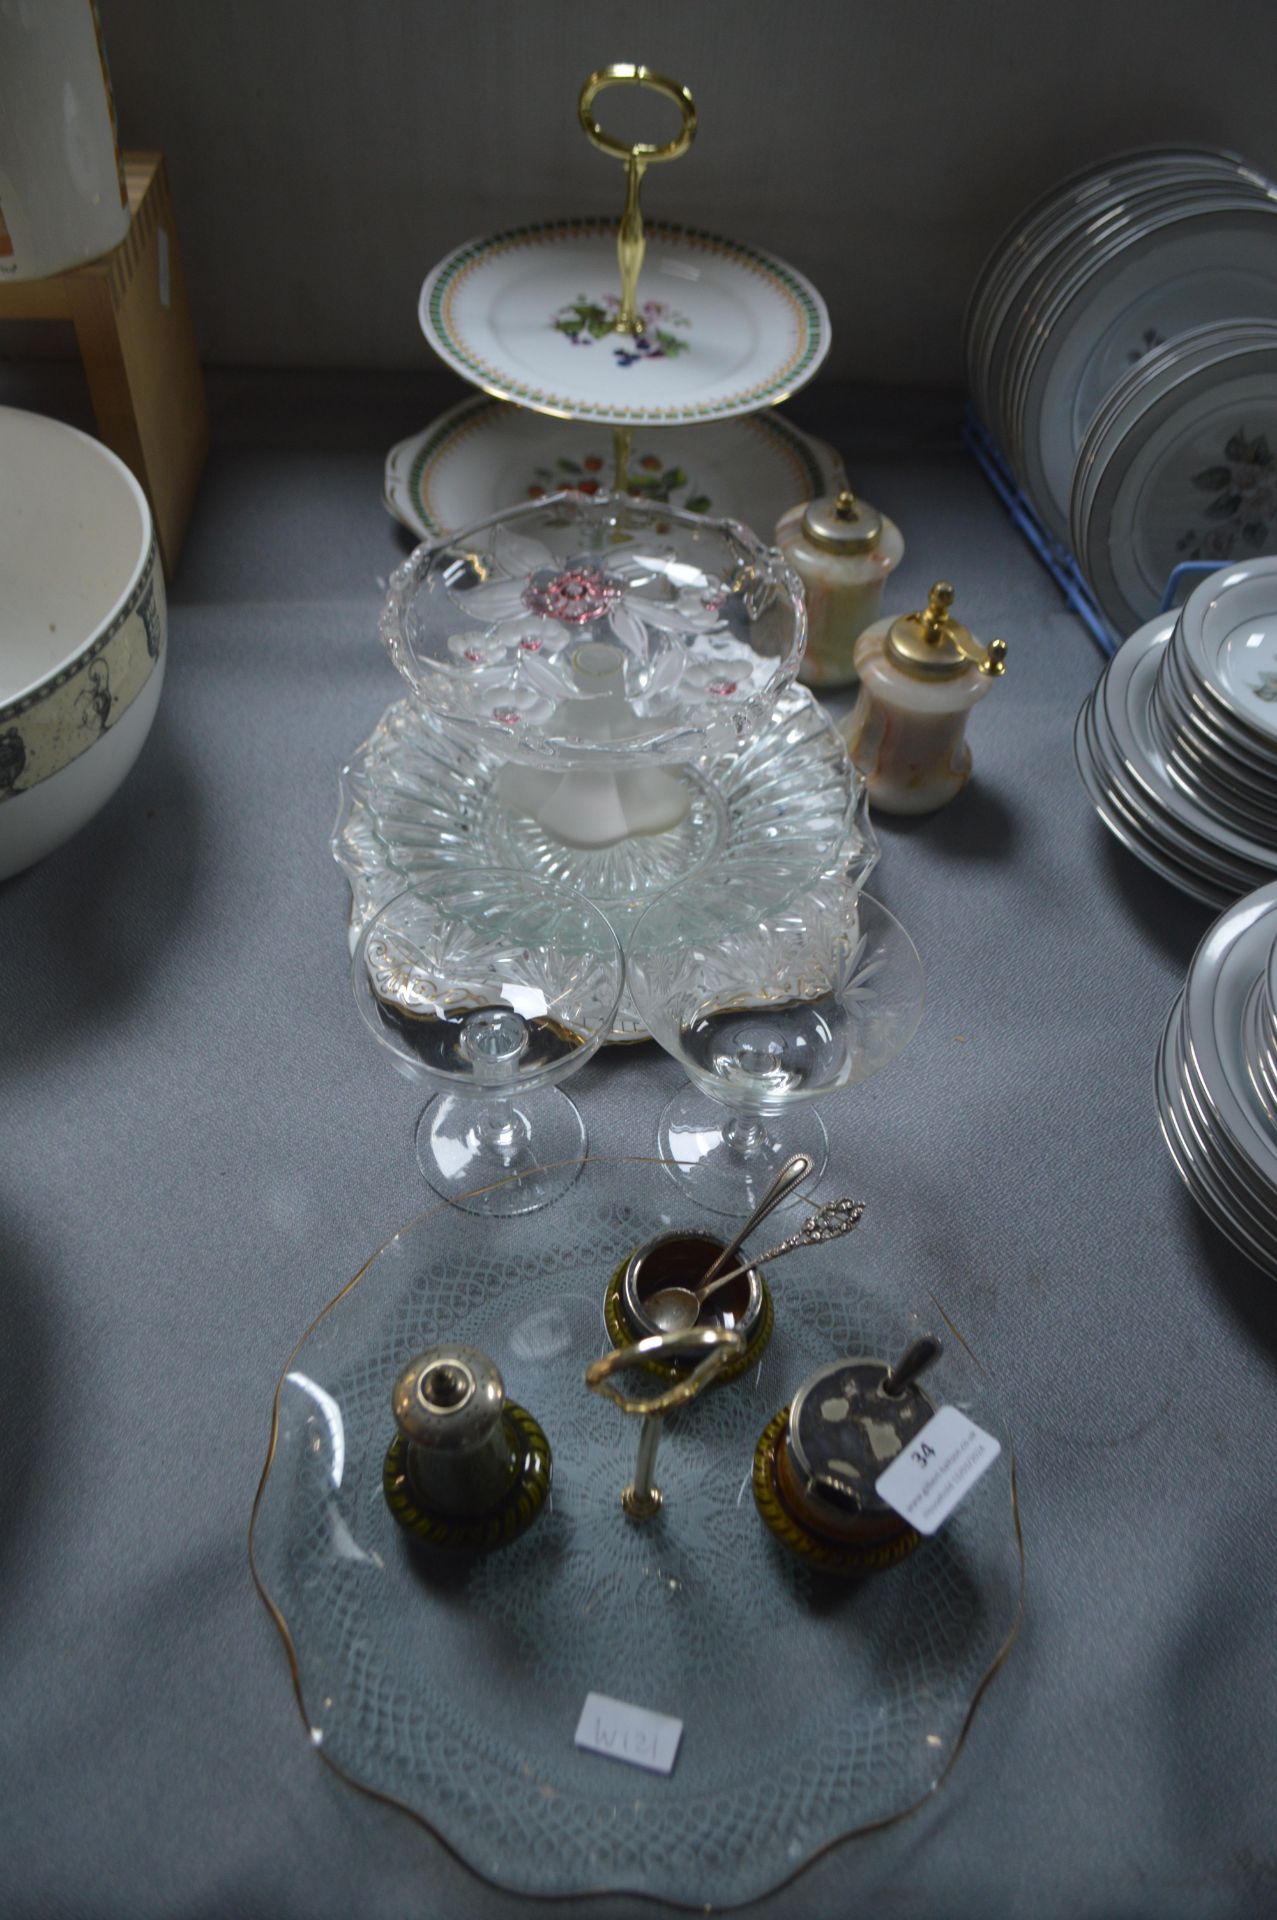 Cake Stands and Glassware etc.